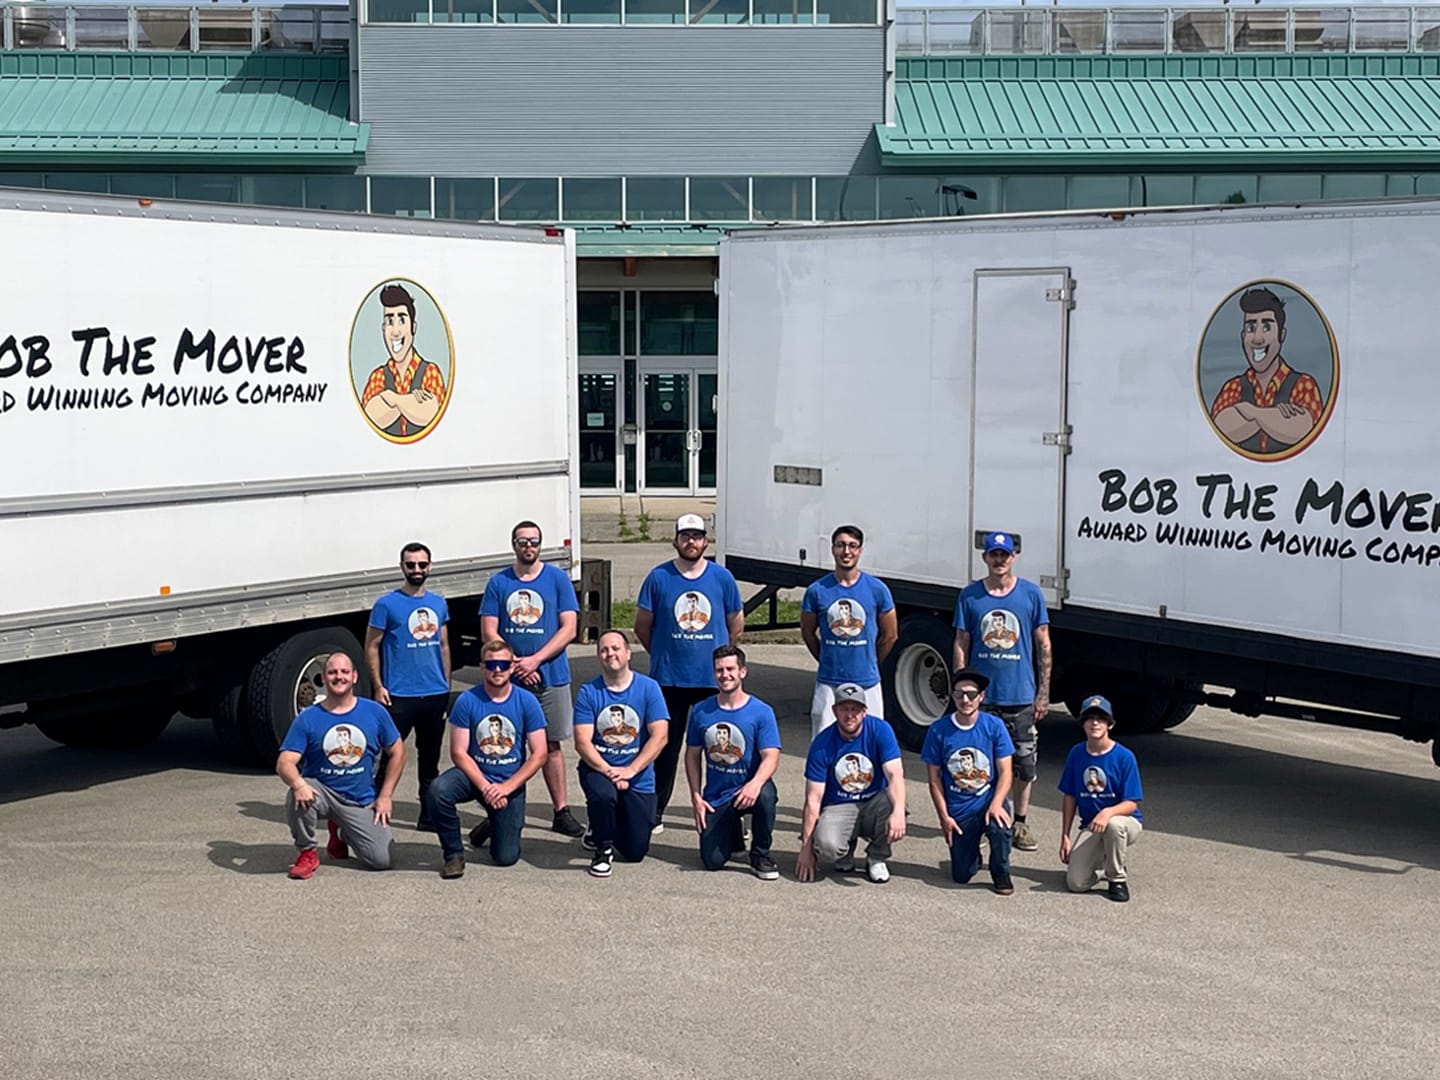 St Catharines Trained And Experienced Movers